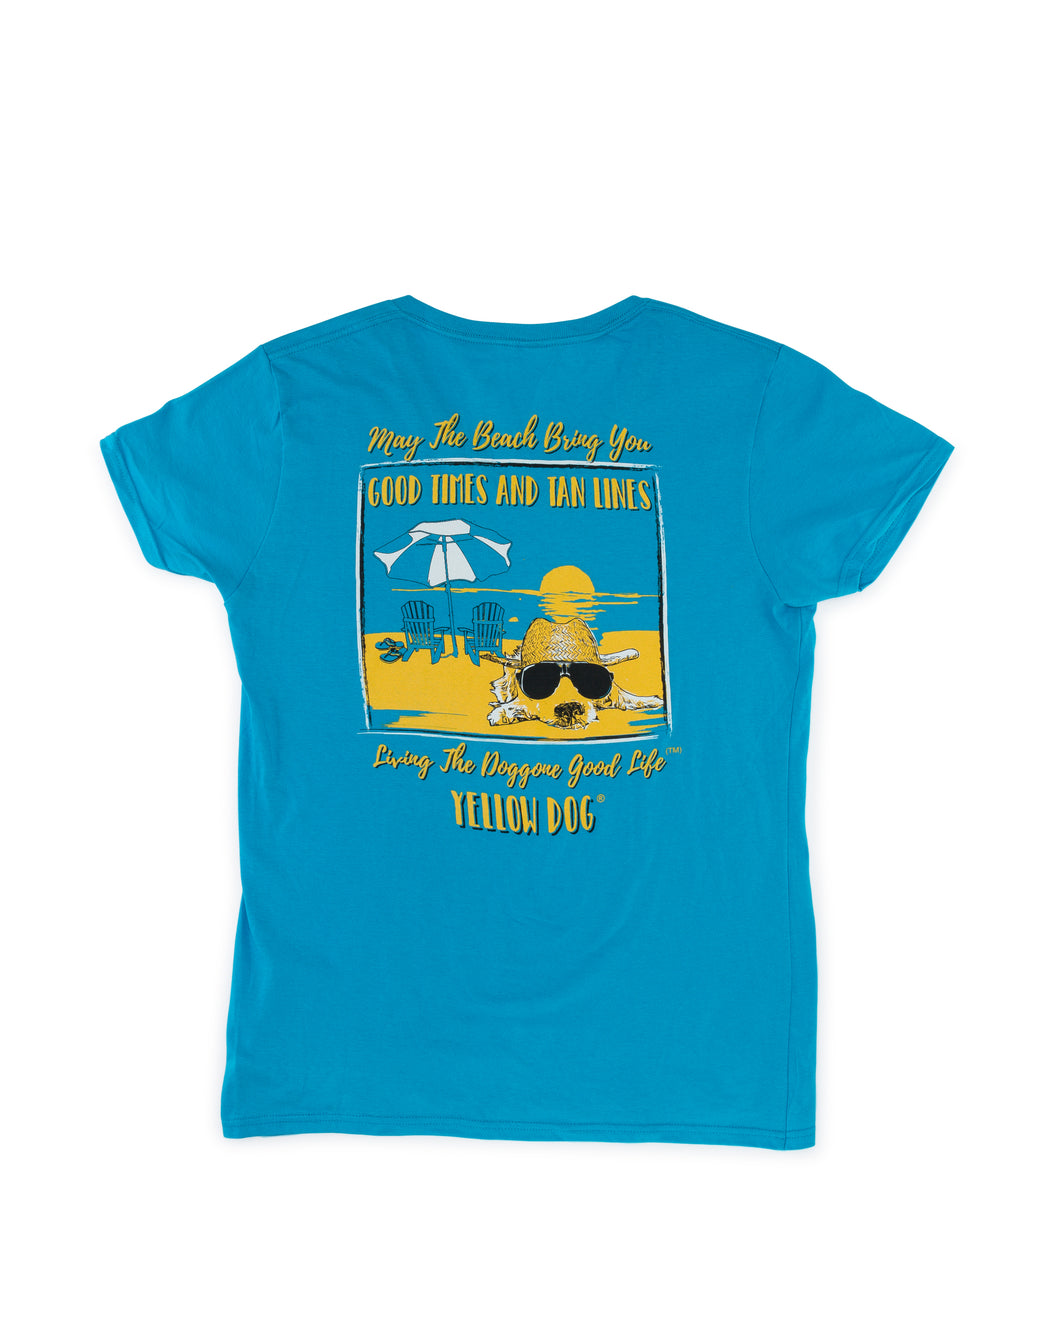 Short Sleeve t-shirt Yellow Dog Collection: Good Times Tan Lines